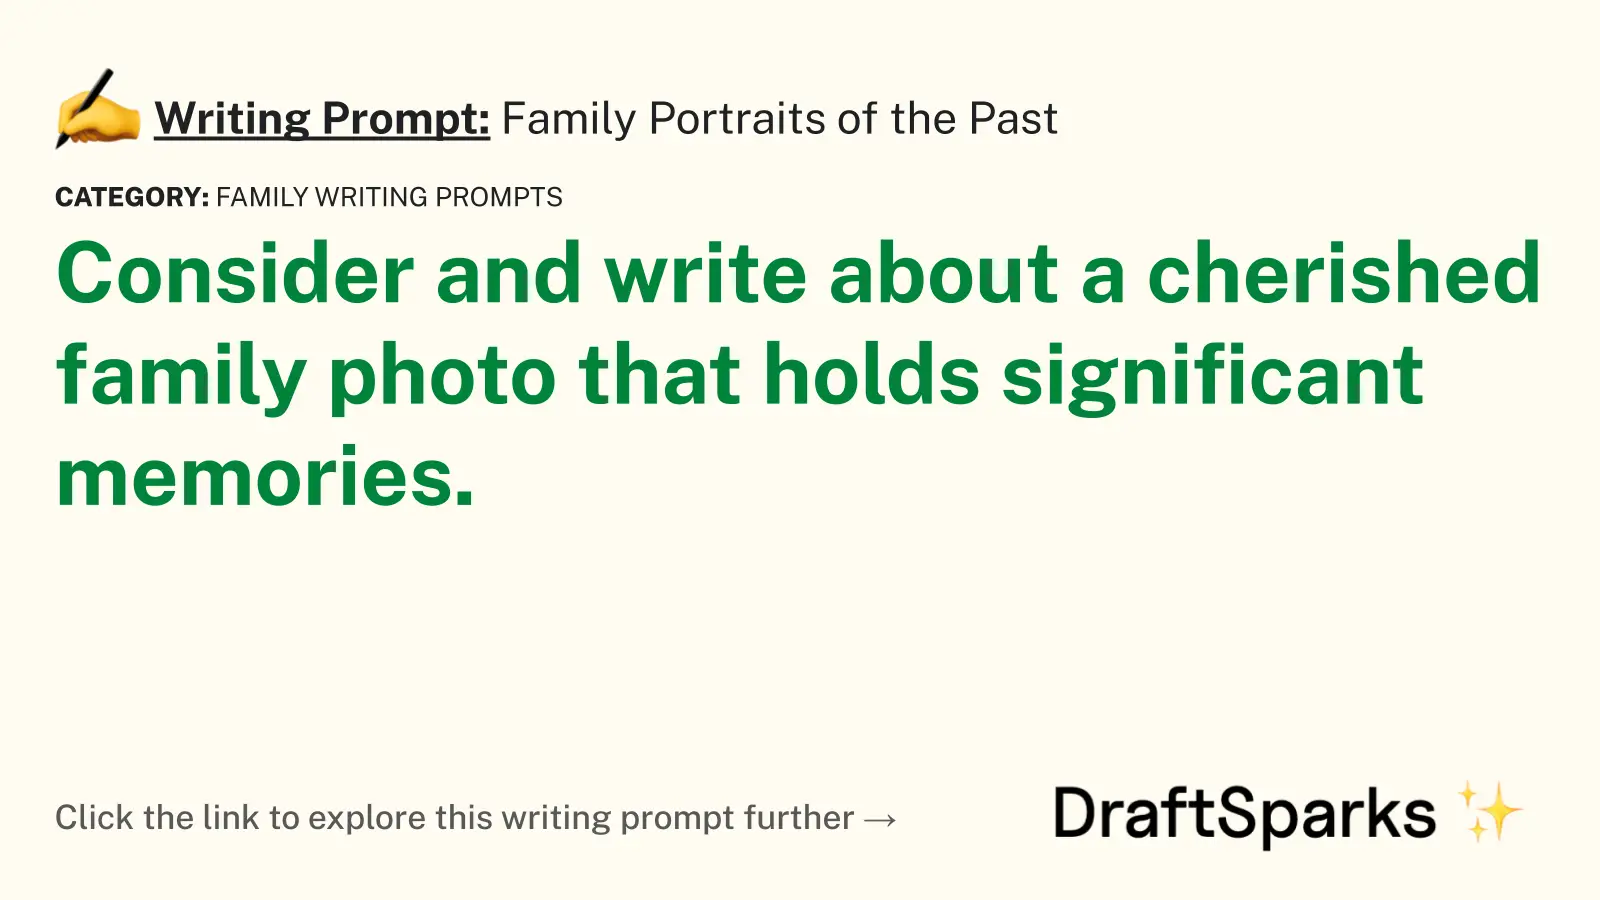 Family Portraits of the Past